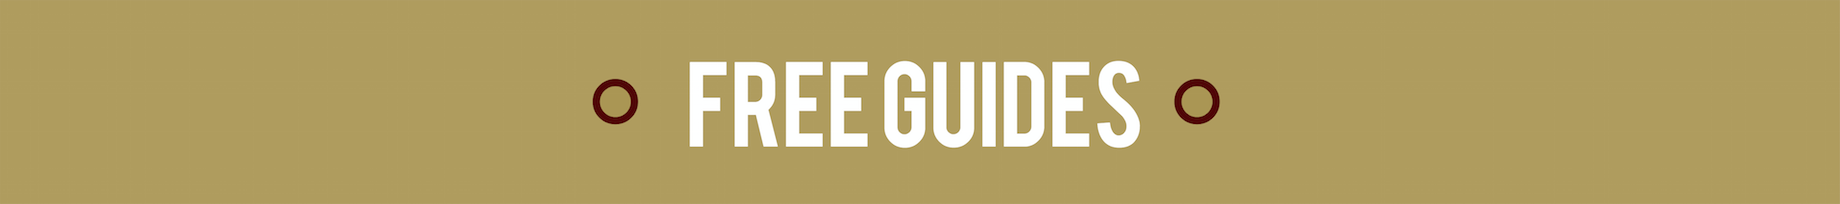 free guides